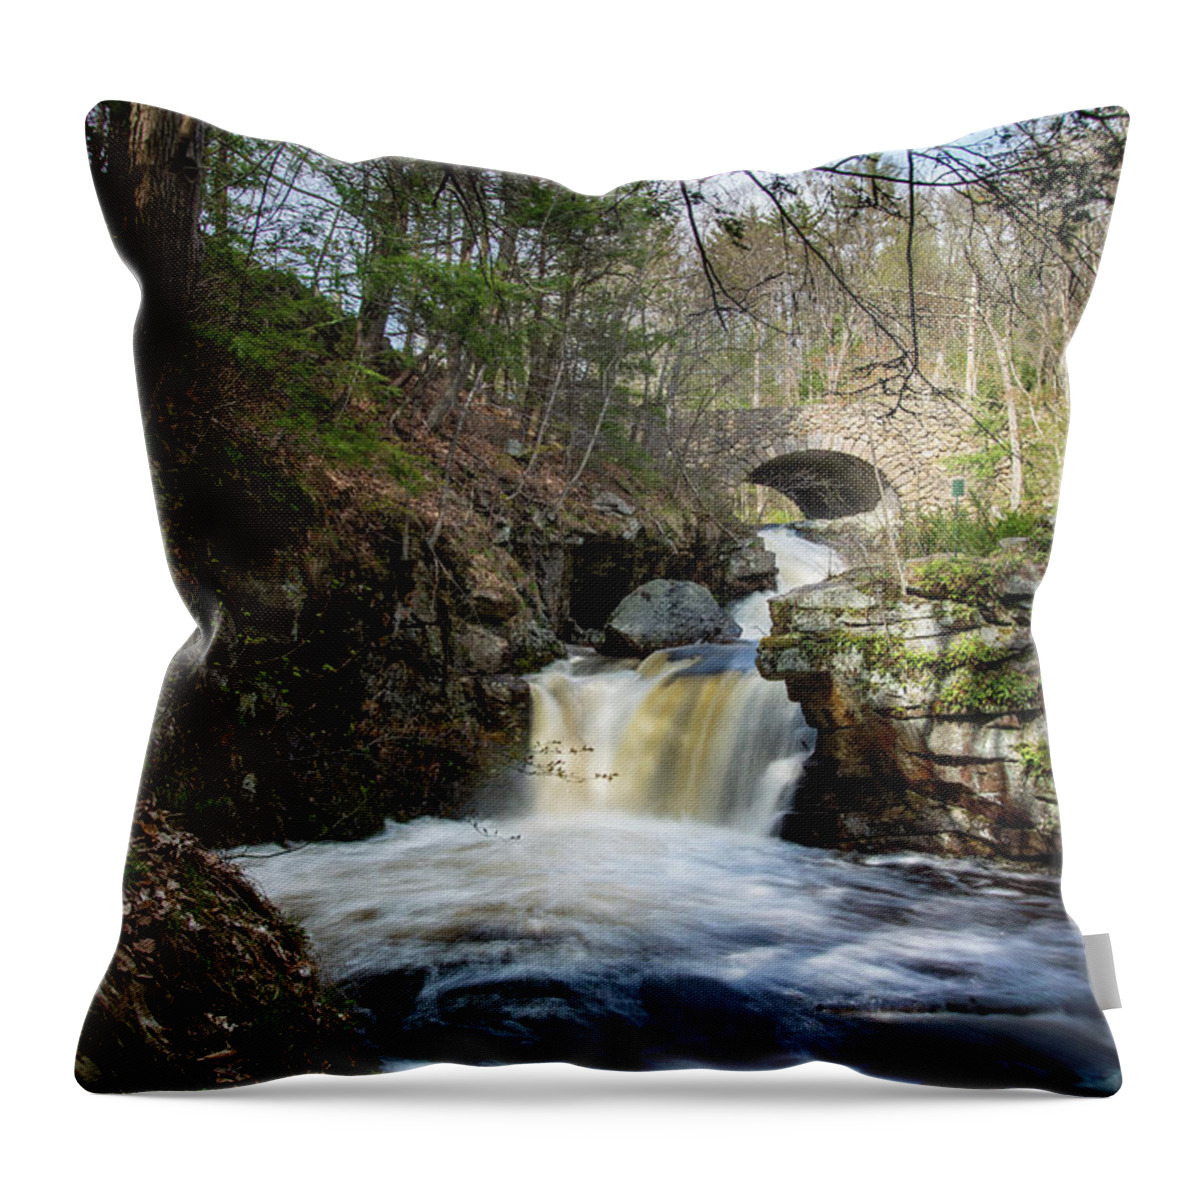 Bolders Throw Pillow featuring the photograph Doane's Falls 1 by Dimitry Papkov